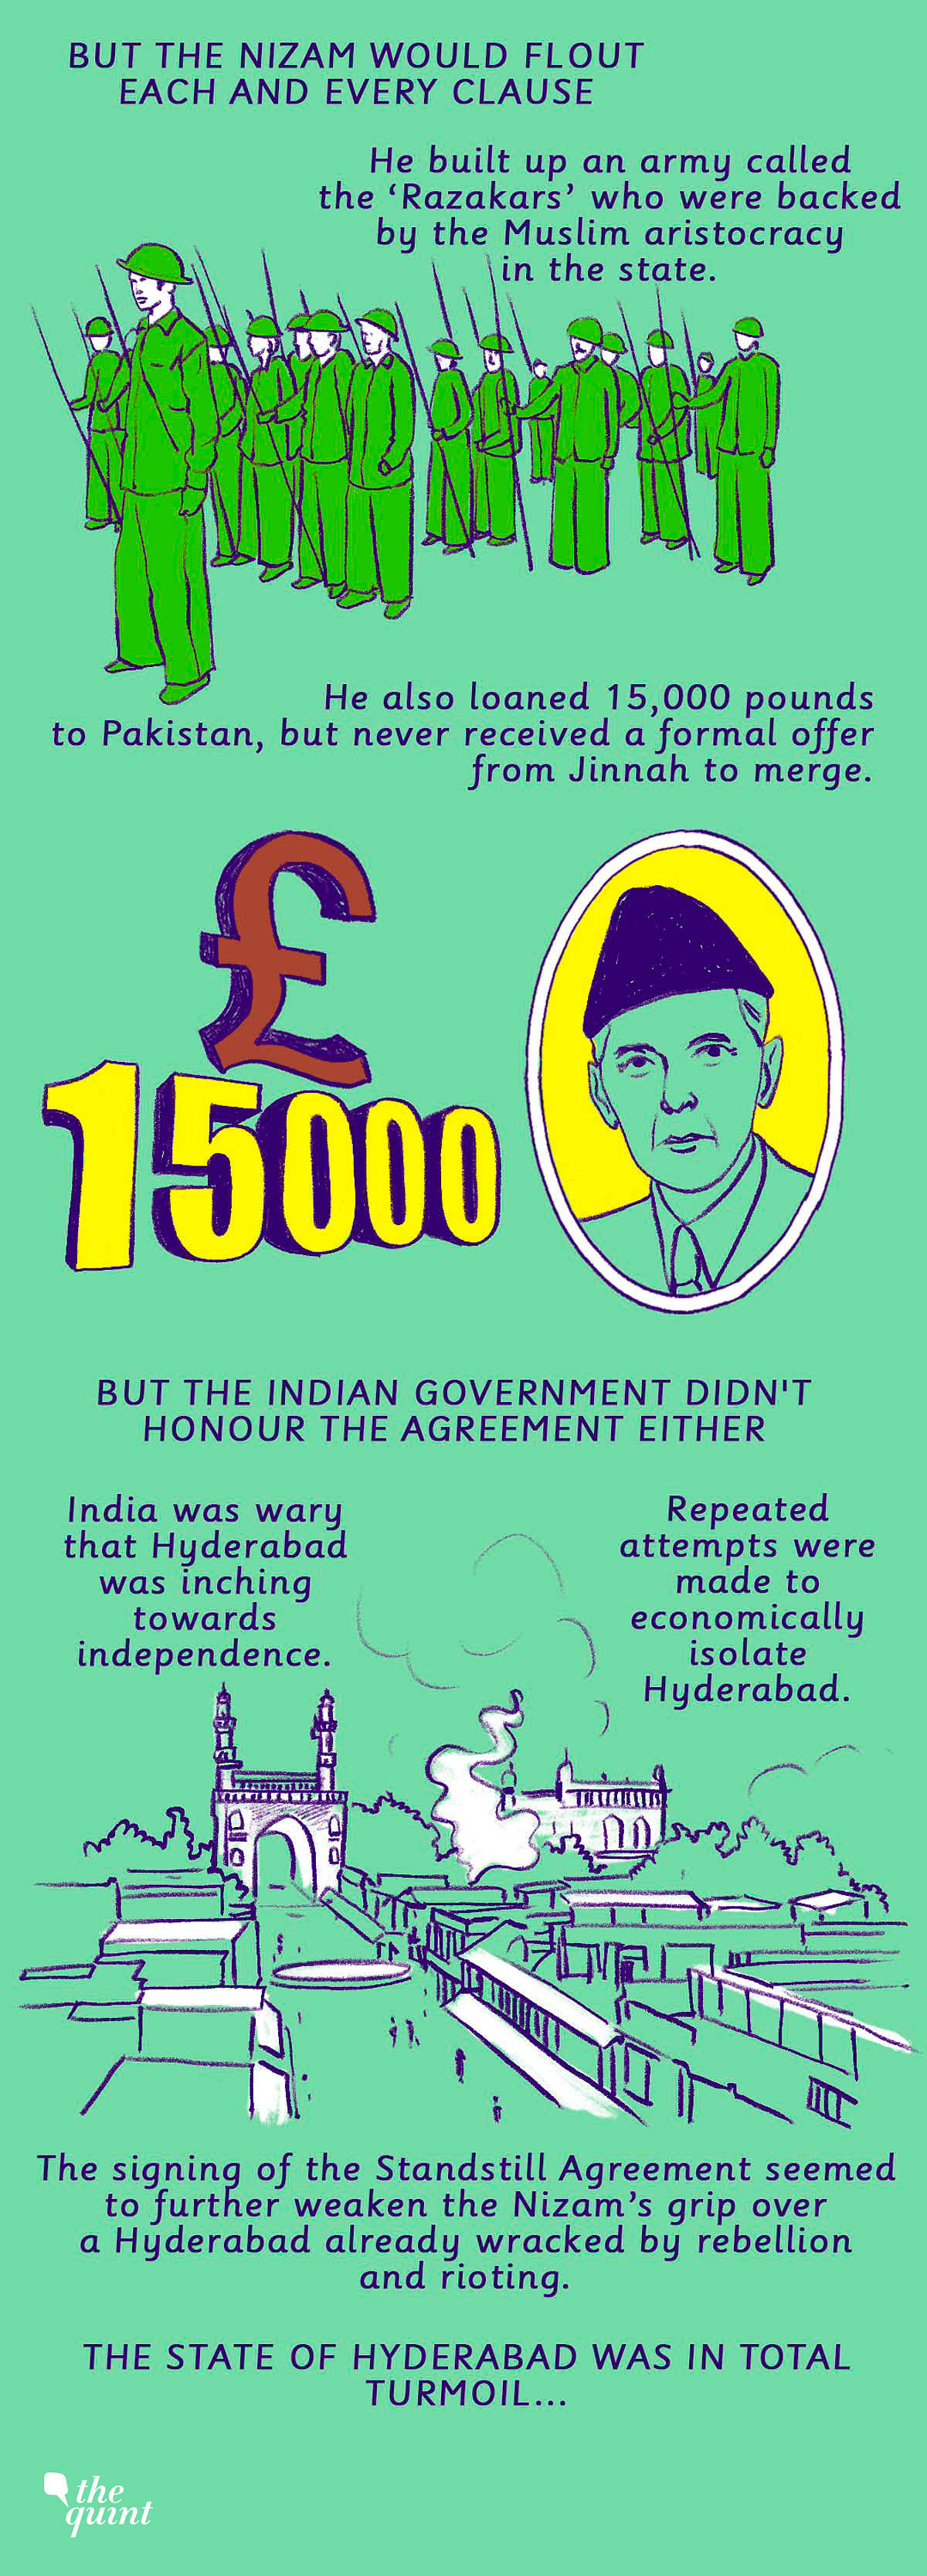  27,000 - 40,000 people were killed in the operation to seize and annex Hyderabad. 